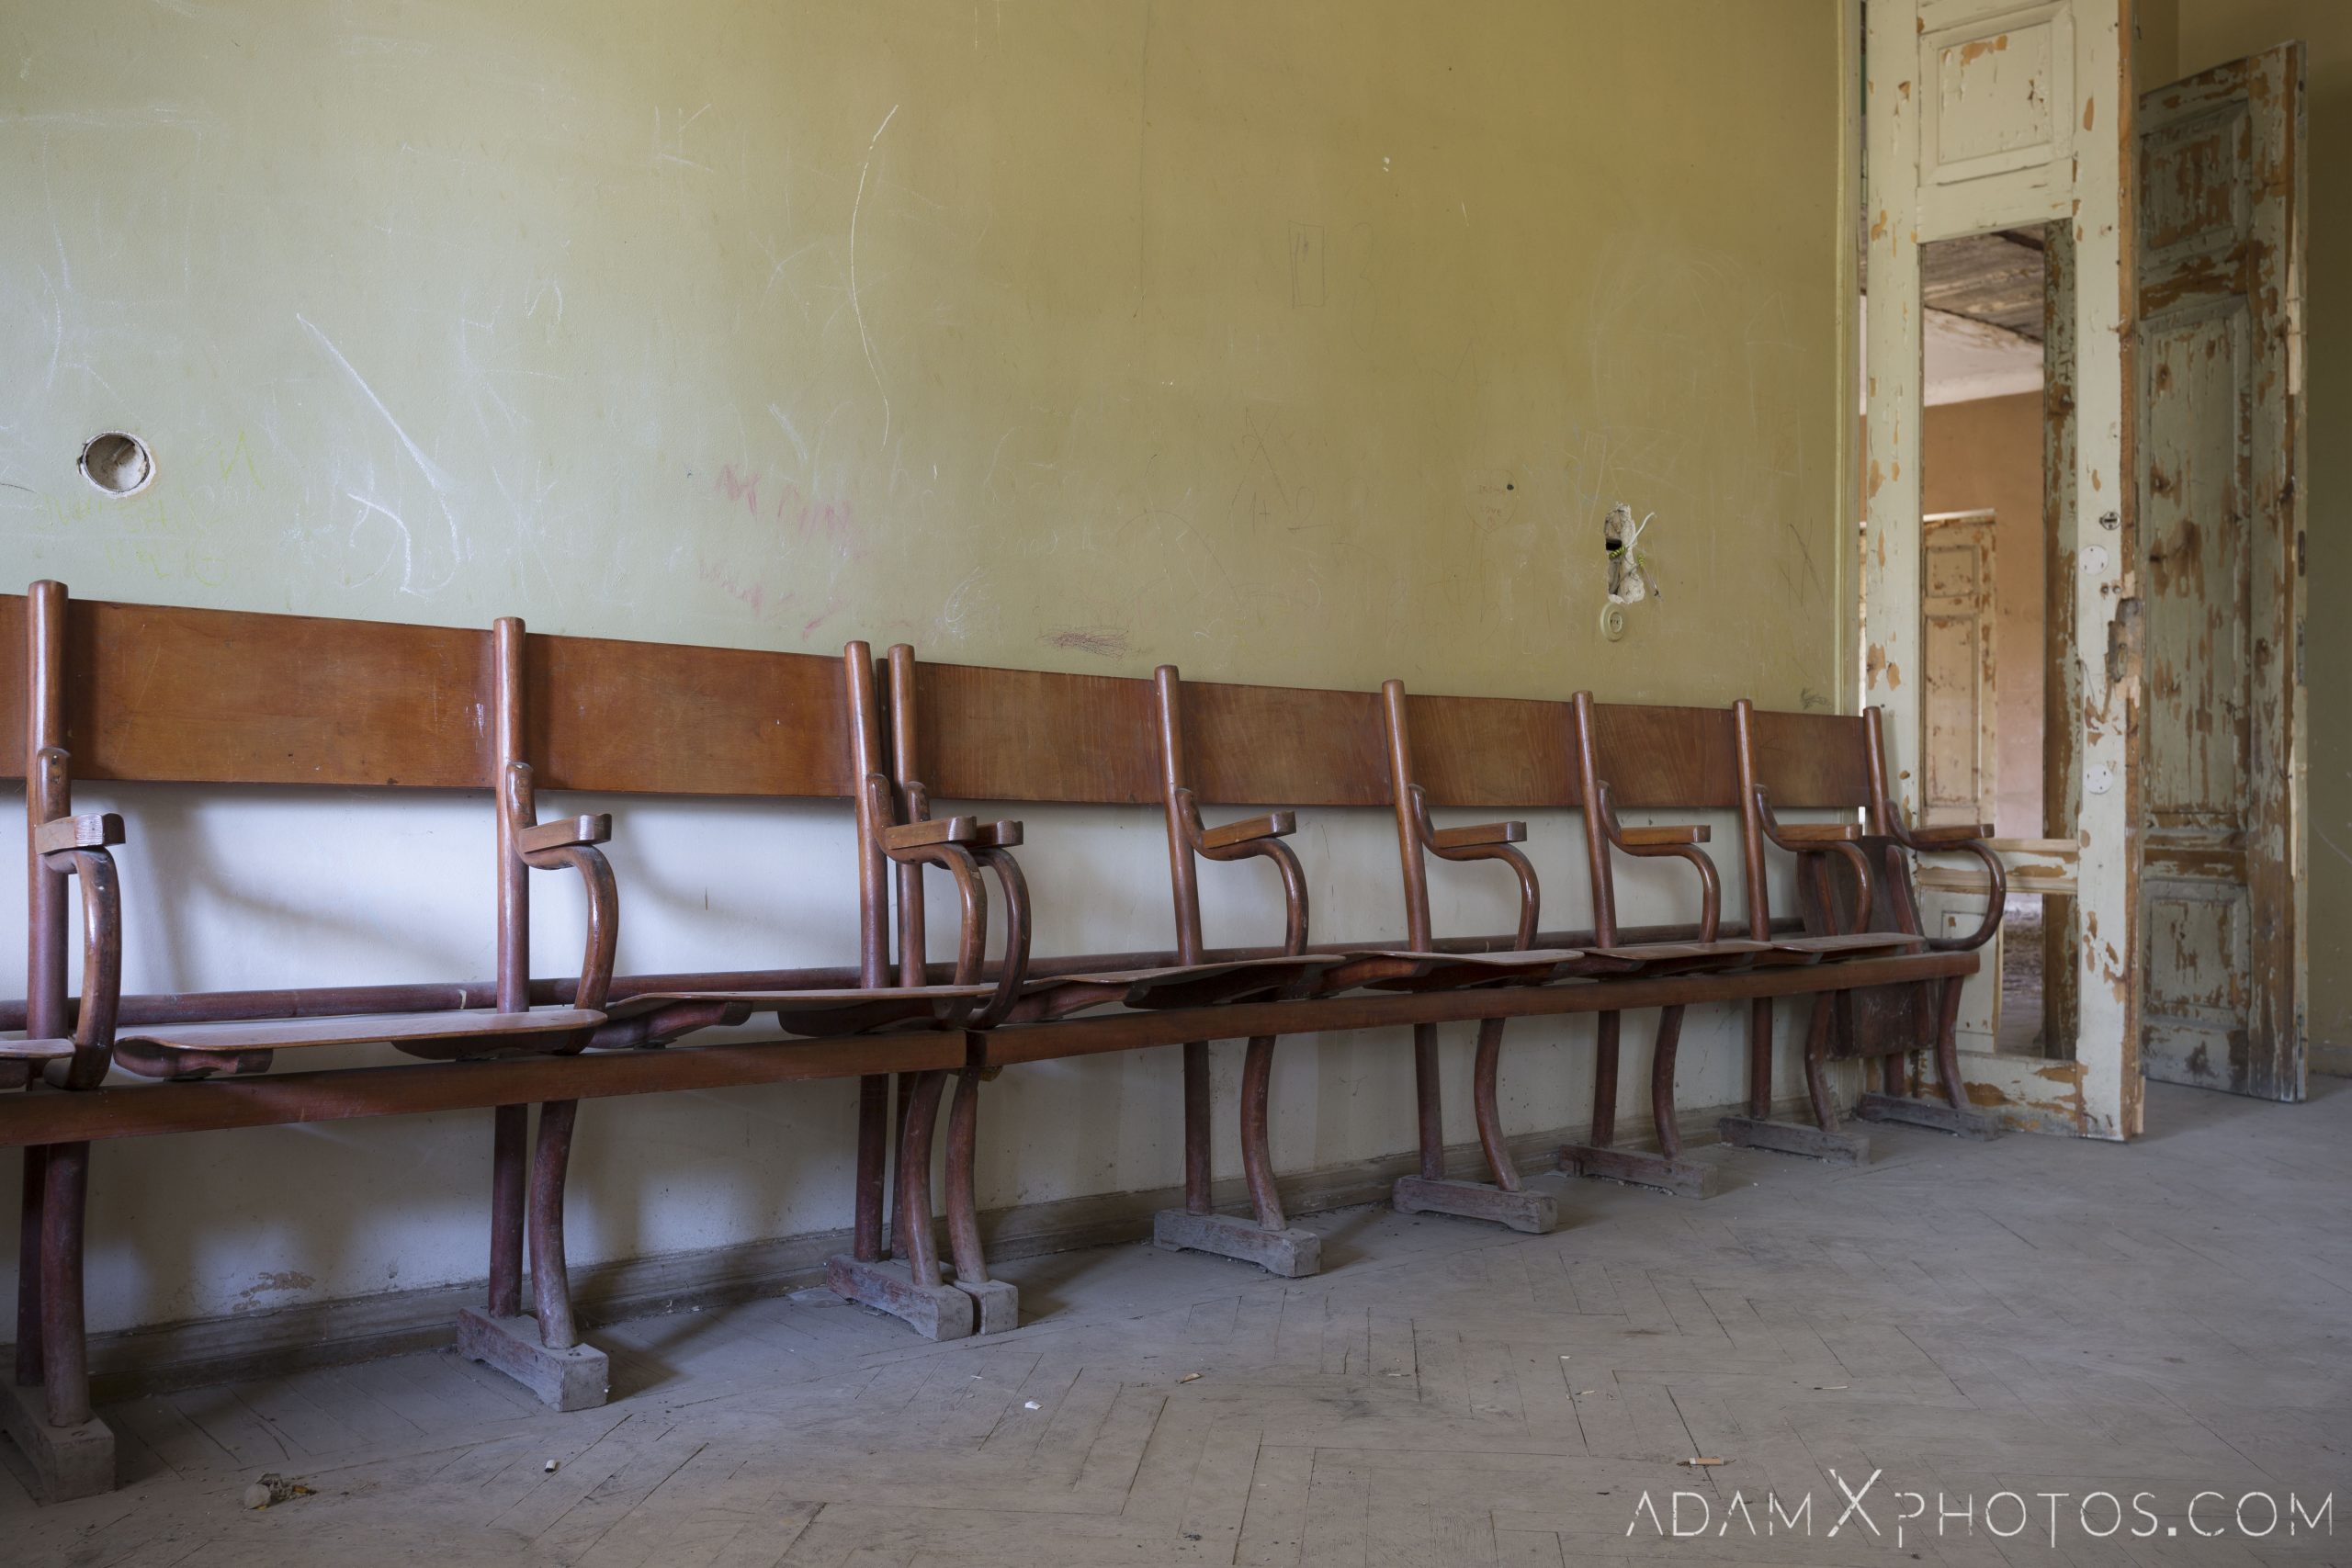 Old wooden chairs House of Culture Palace Blue rural Soviet era Georgia Adam X AdamXPhotos Urbex Urban Exploration 2018 Abandoned Access History decay ruins lost forgotten derelict location creepy haunting eerie security